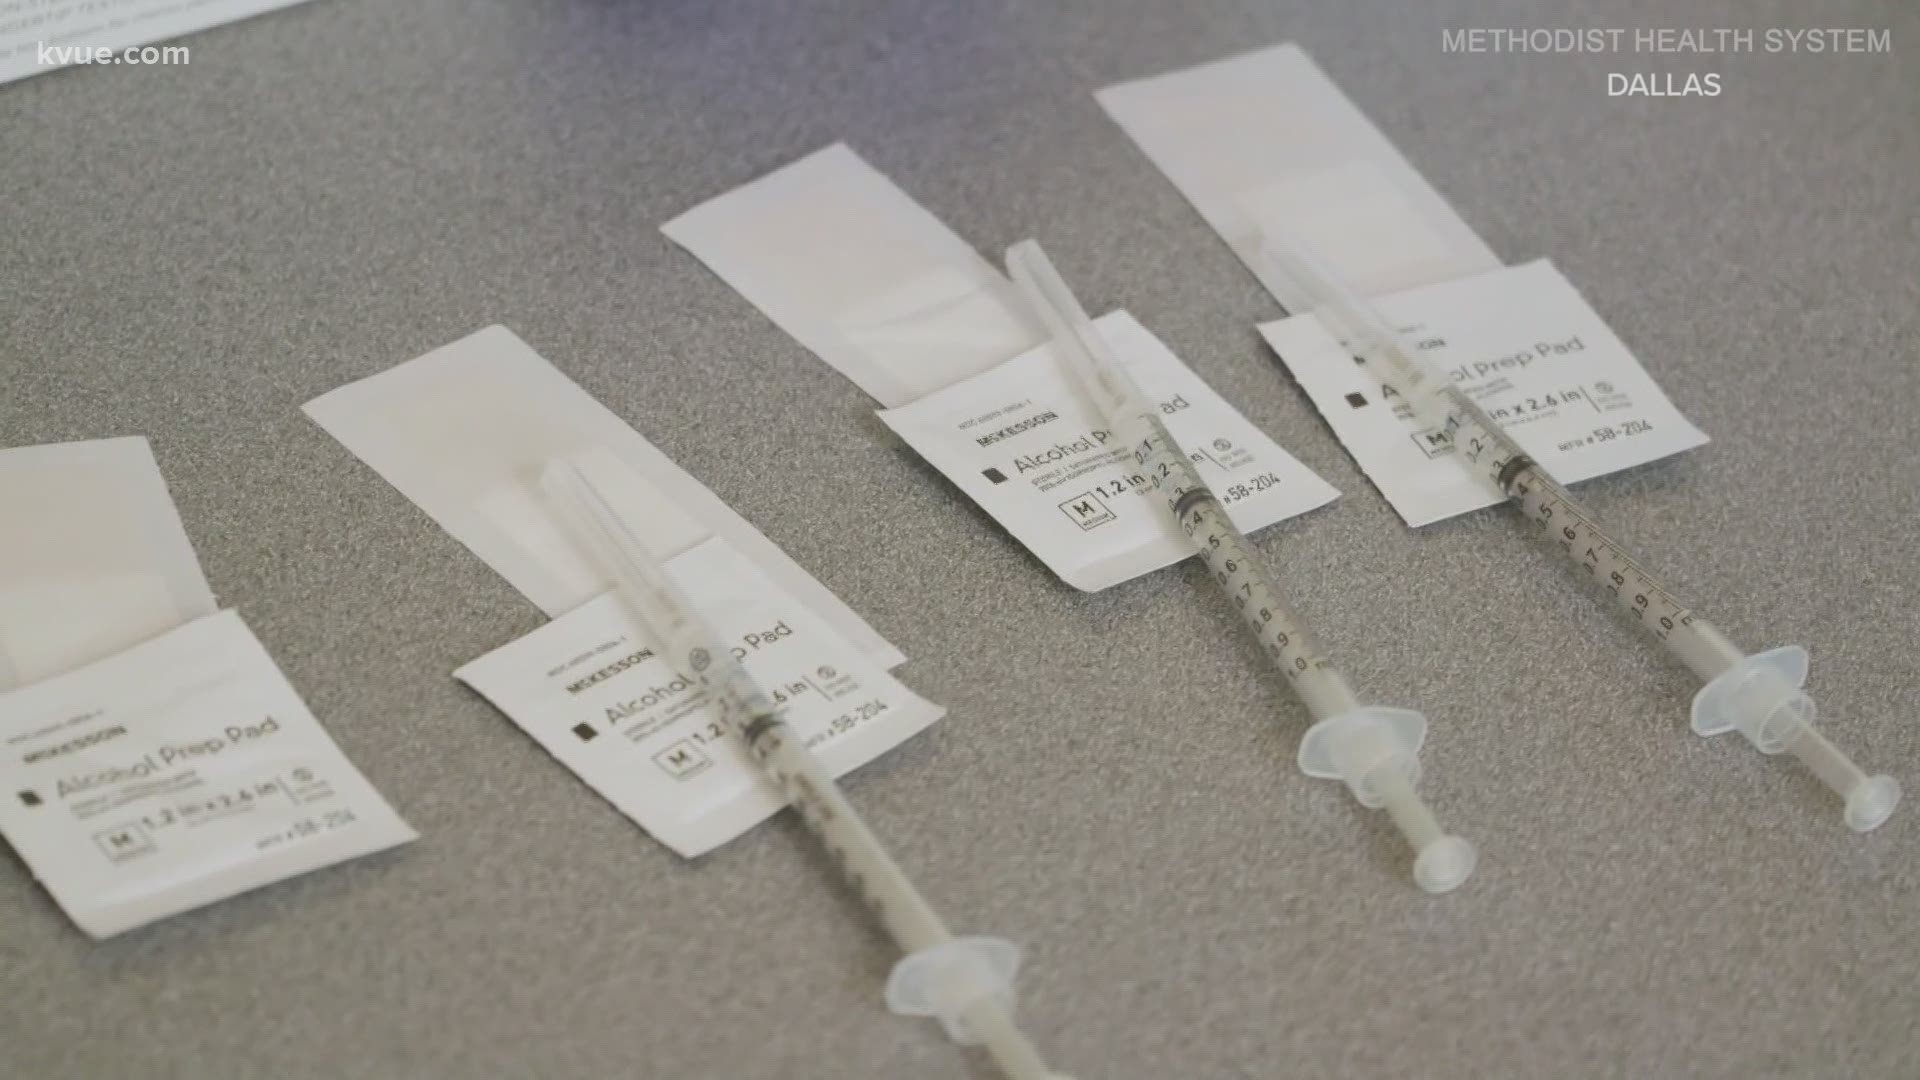 A KVUE Defenders investigation found a flaw in the state's system that makes it accessible to people who are not yet qualified to get the vaccine.